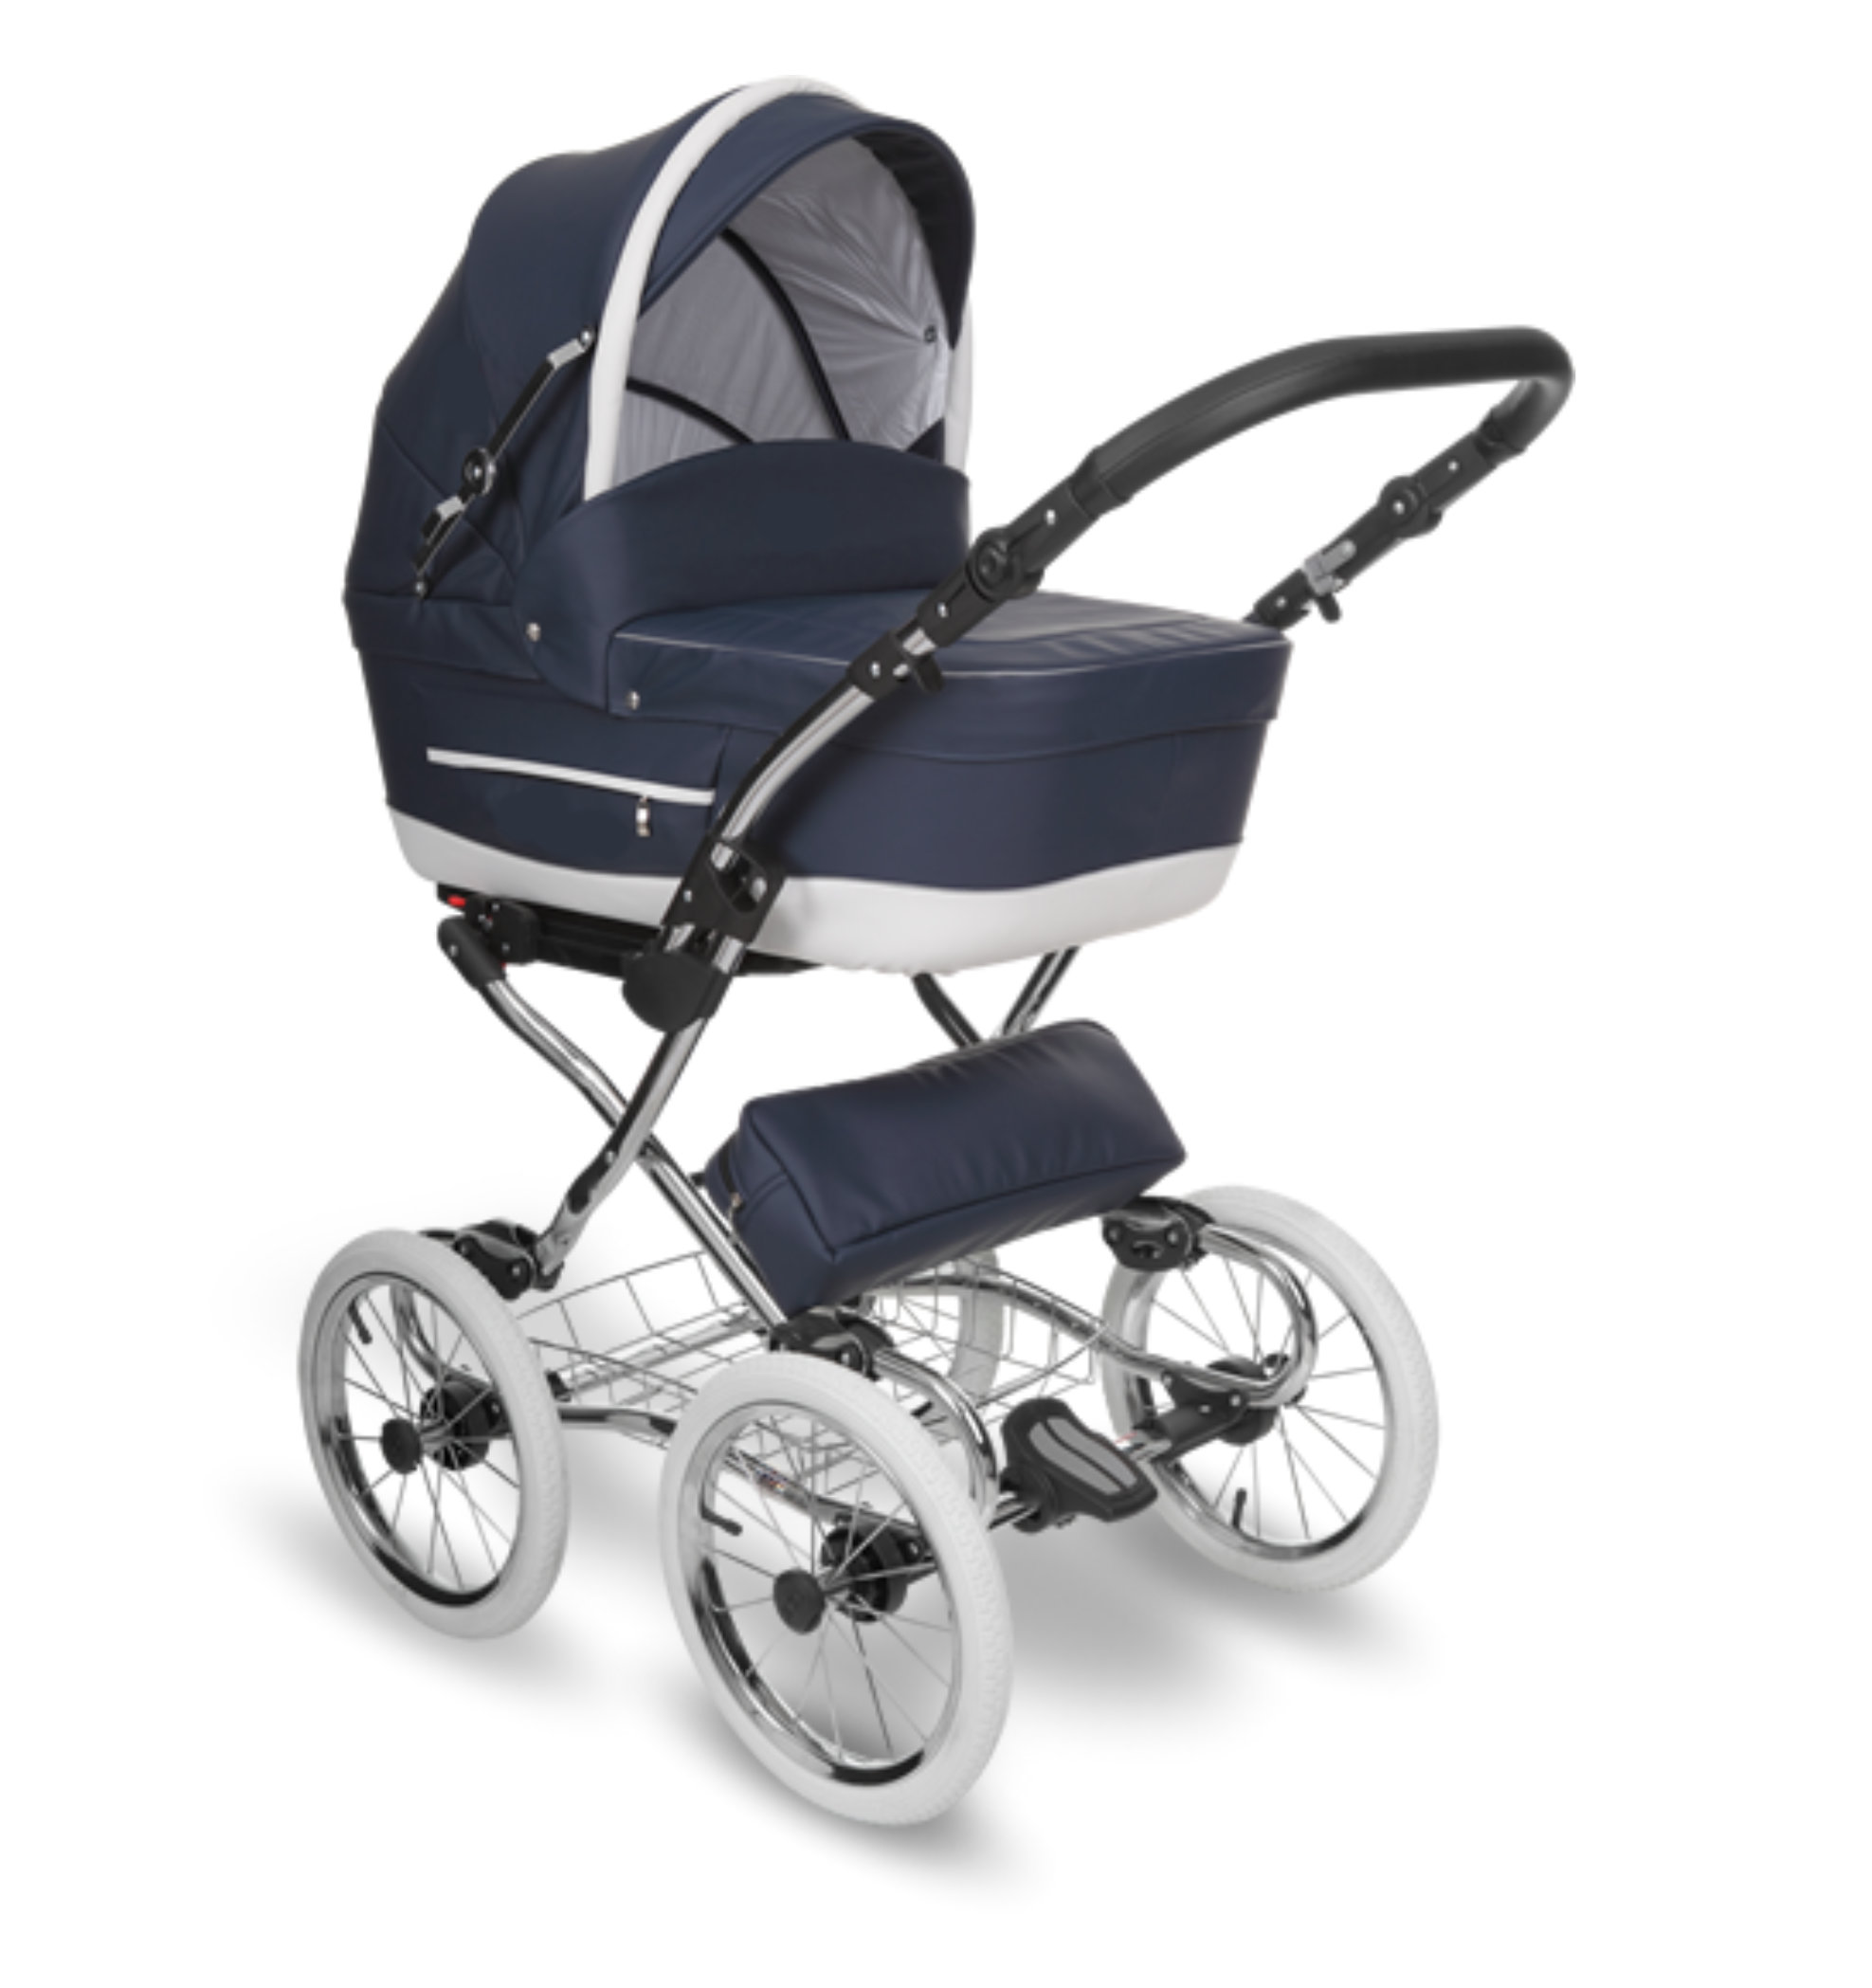 Bambini Prams YORK shown in Navy Blue Eco Leather. Shown with Bassinet attachment.